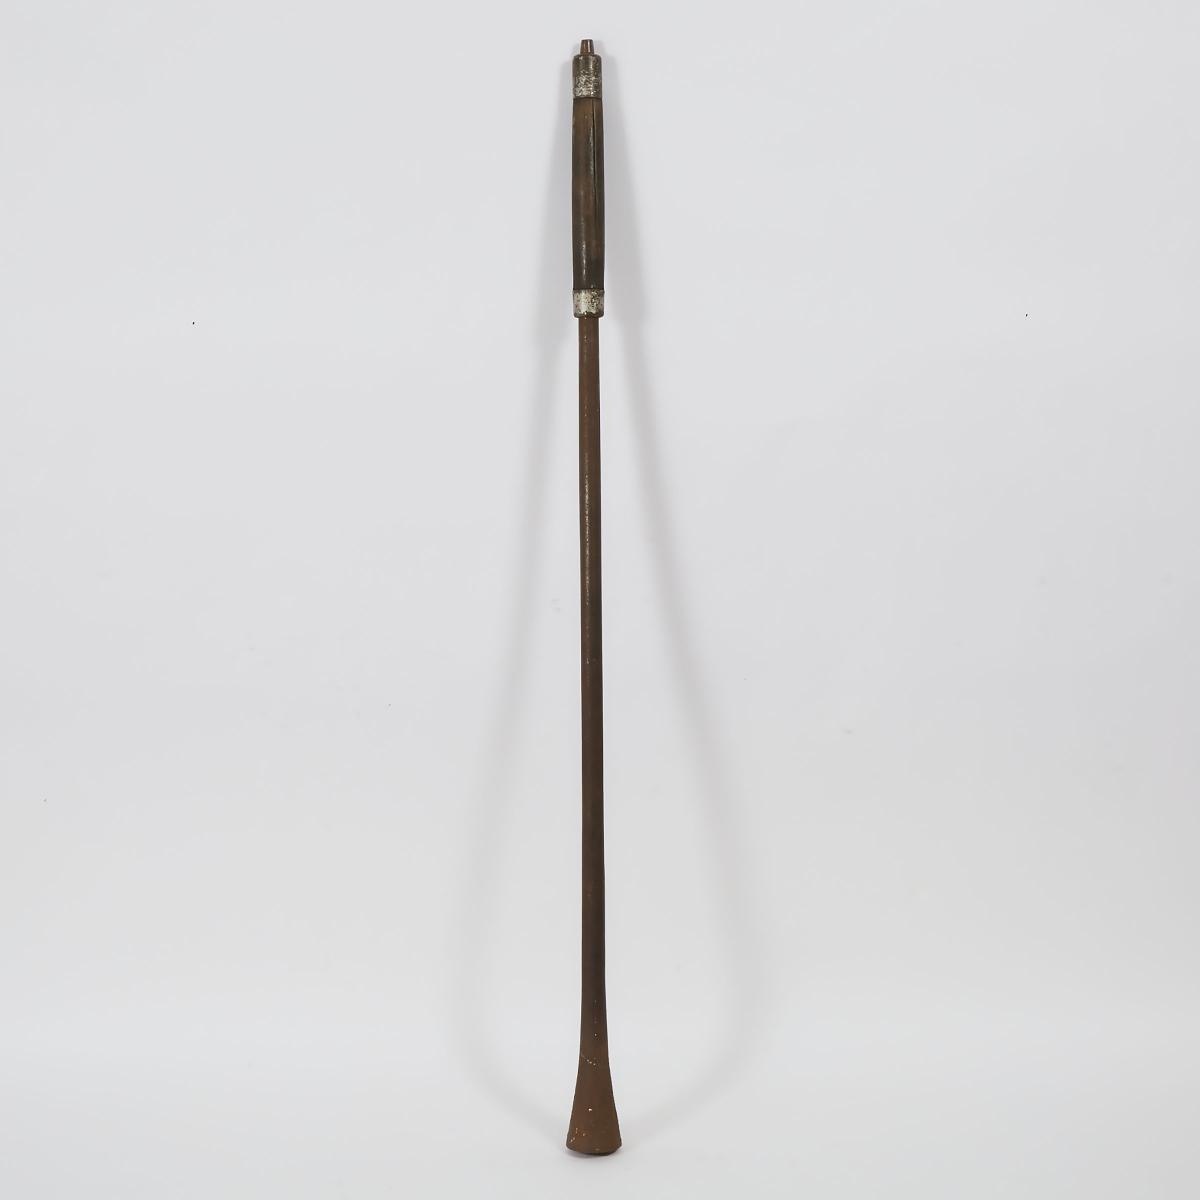 Glass Blowpipe and a Pyro Optical Pyrometer, mid 20th century, length 58 in — 147.3 cm - Image 3 of 5